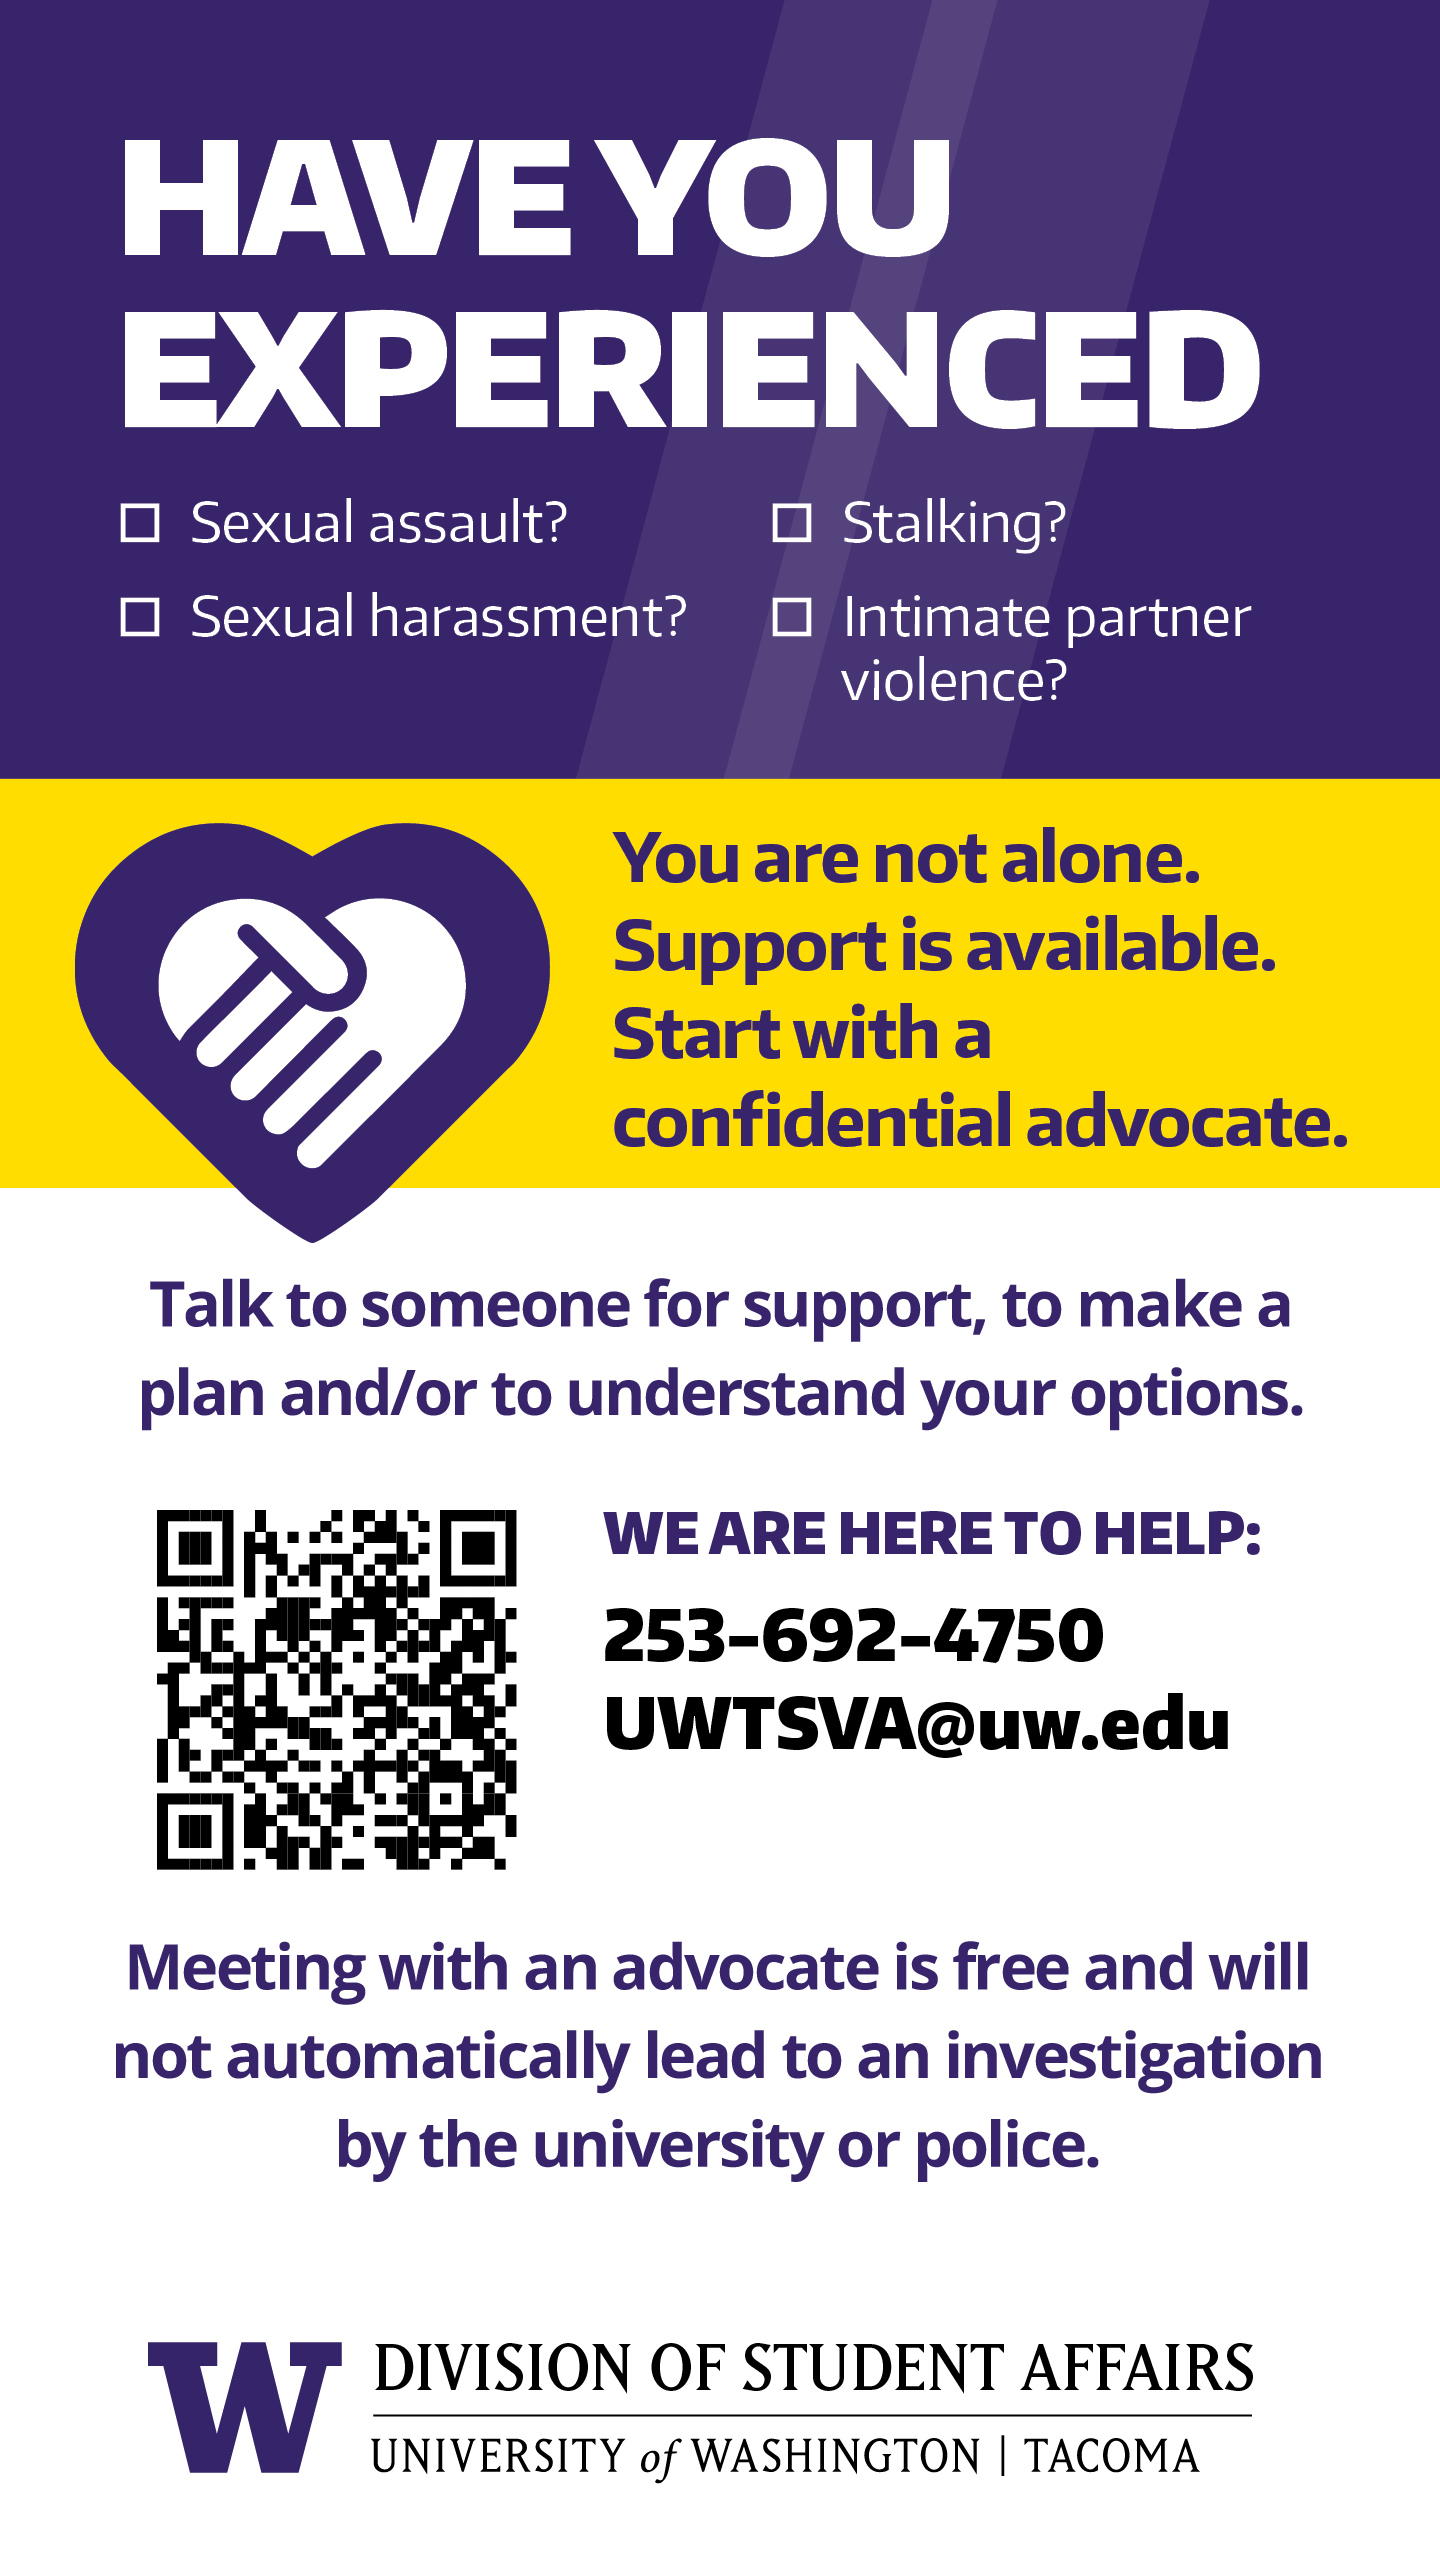 Brochure with information about reporting incidents of sexual violence